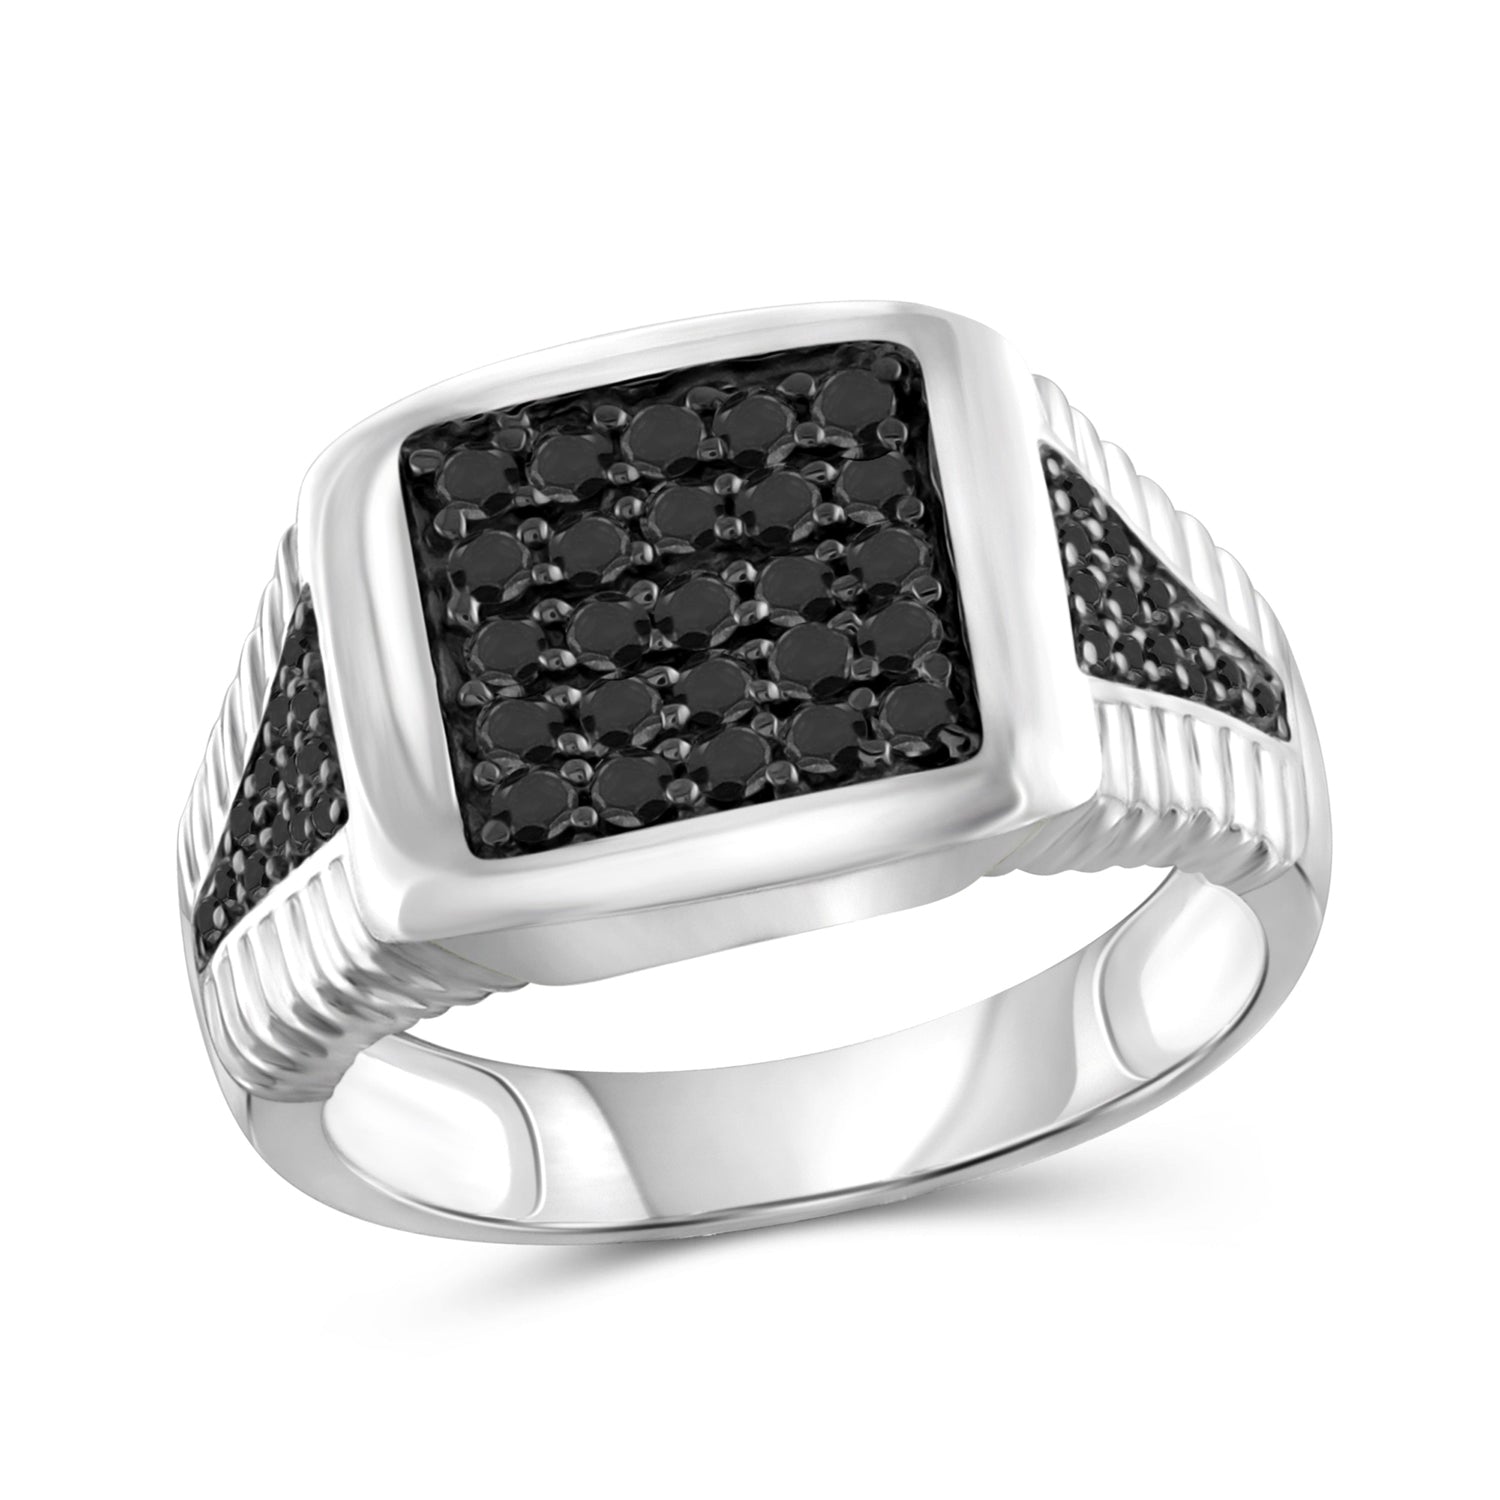 Men's Classic Silver Ring | Affordable Accessories for Men - CMC | Classy  Men Collection